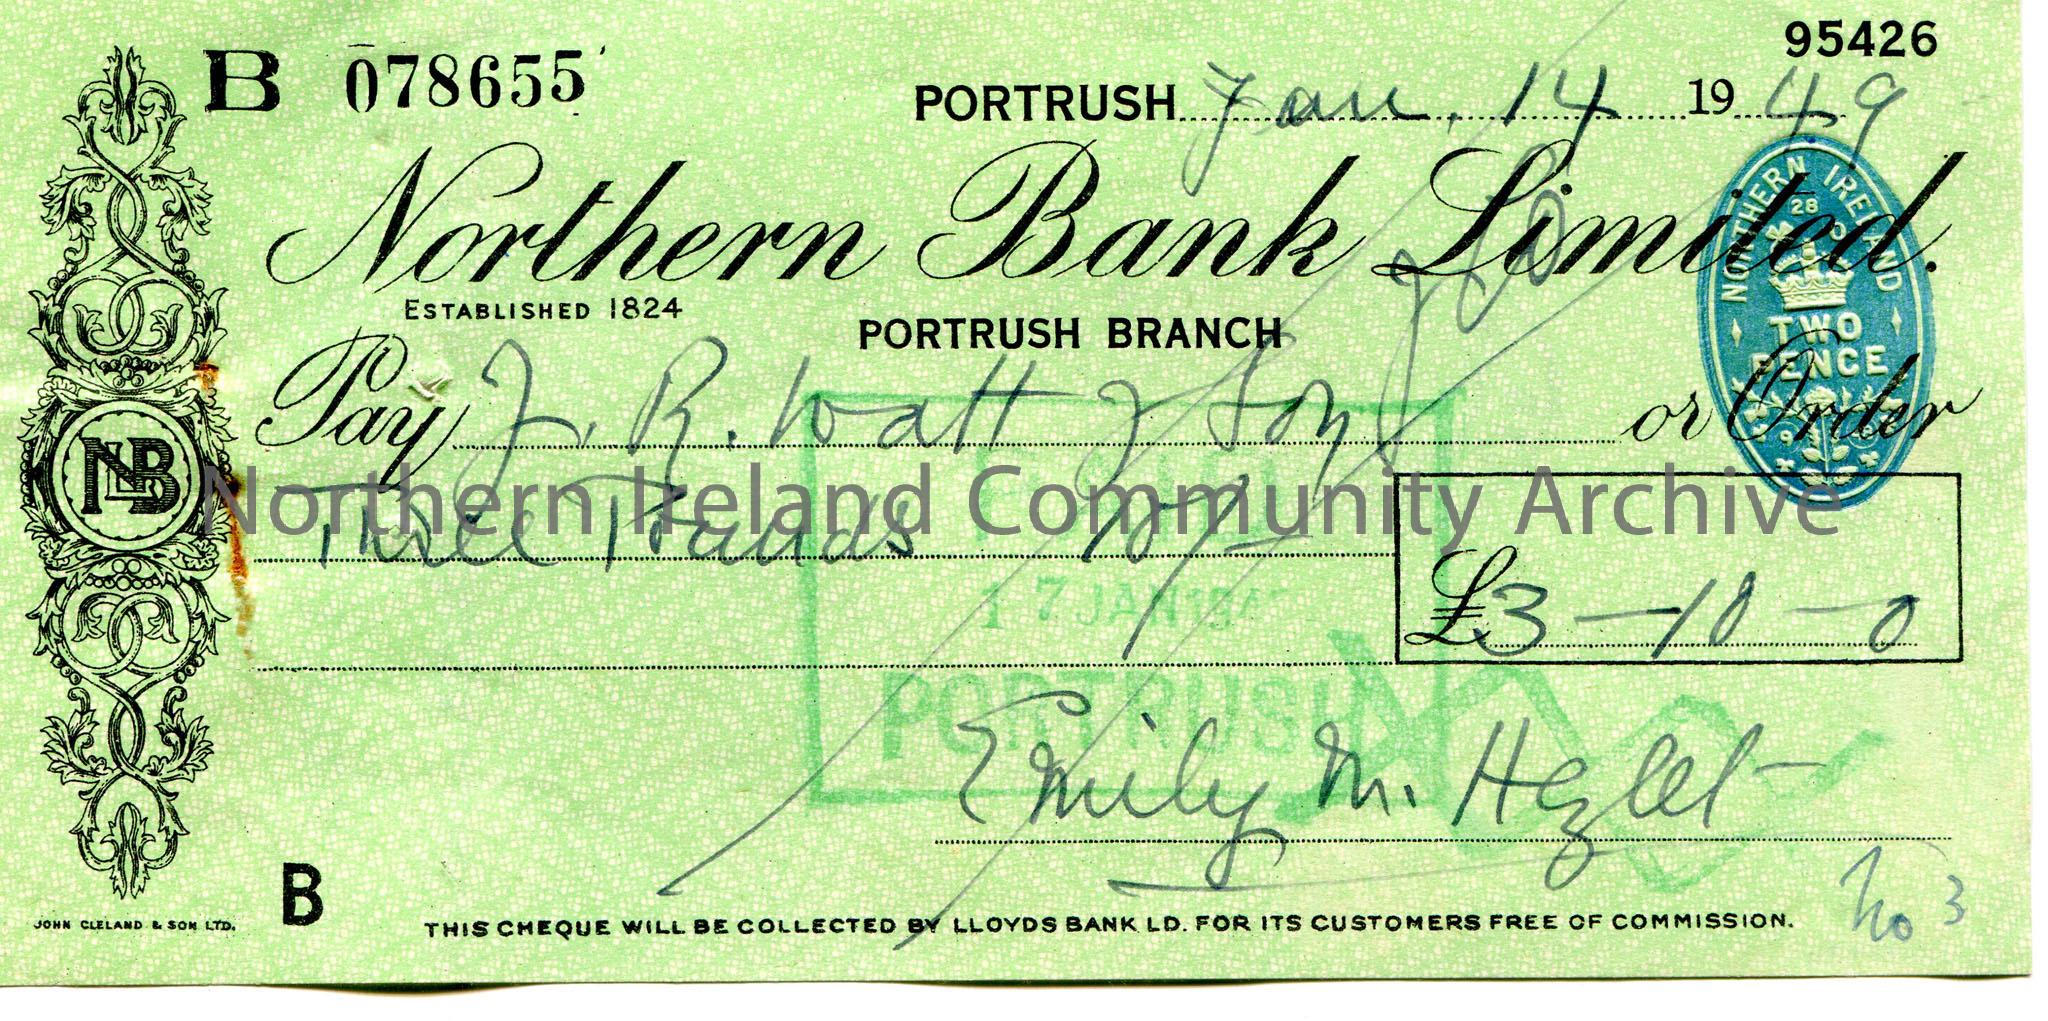 Handwritten cheque payable to J.R.Watt and Son for £3-10-0. Signed by Emily M. Hezlet and dated 14th January, 1949. Cheque no 078655. Northern Ba…